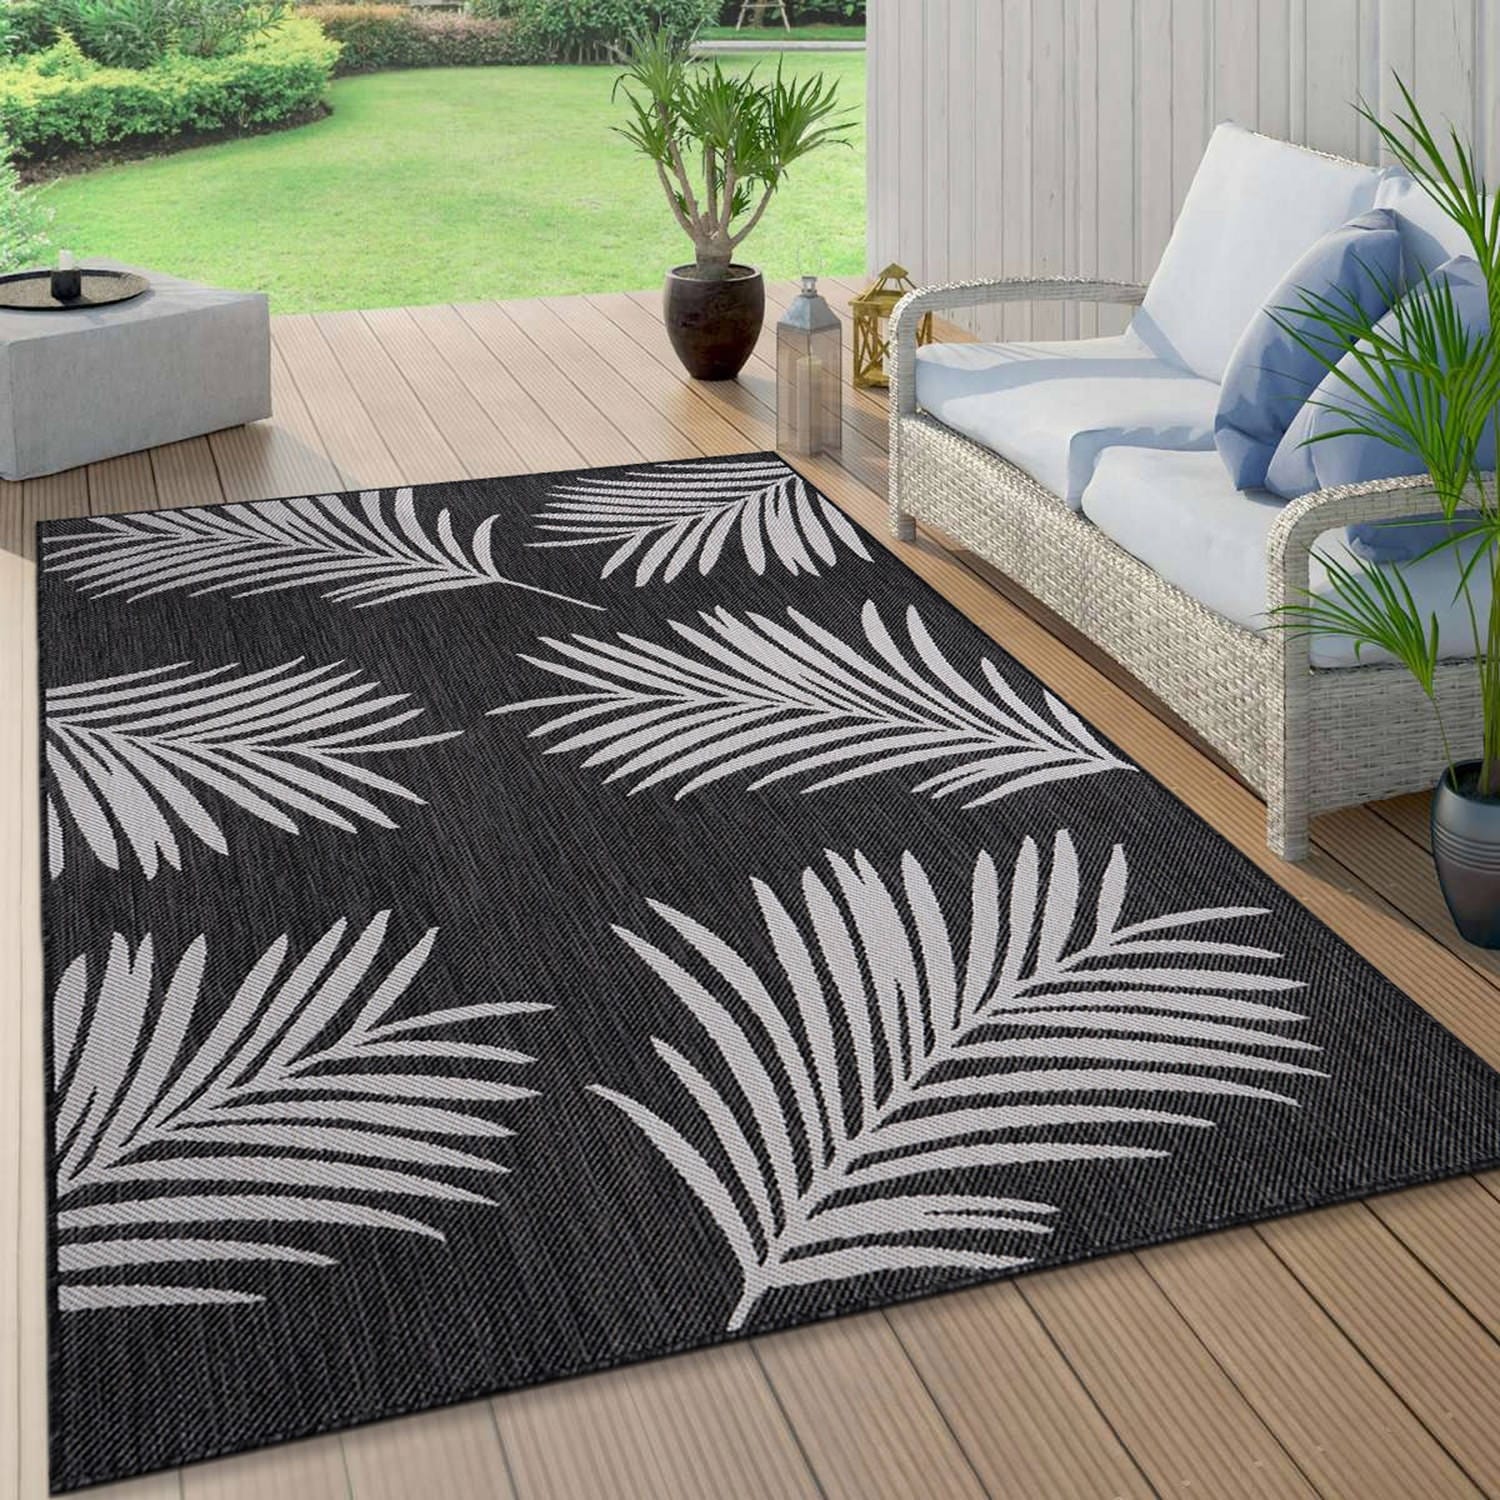 https://ak1.ostkcdn.com/images/products/is/images/direct/2660b623ec25ea0e461f0e2826764fca176ac0a5/World-Rug-Gallery-Contemporary-Palm-Leaves-Textured-Flat-Weave-Indoor-Outdoor-Area-Rug.jpg